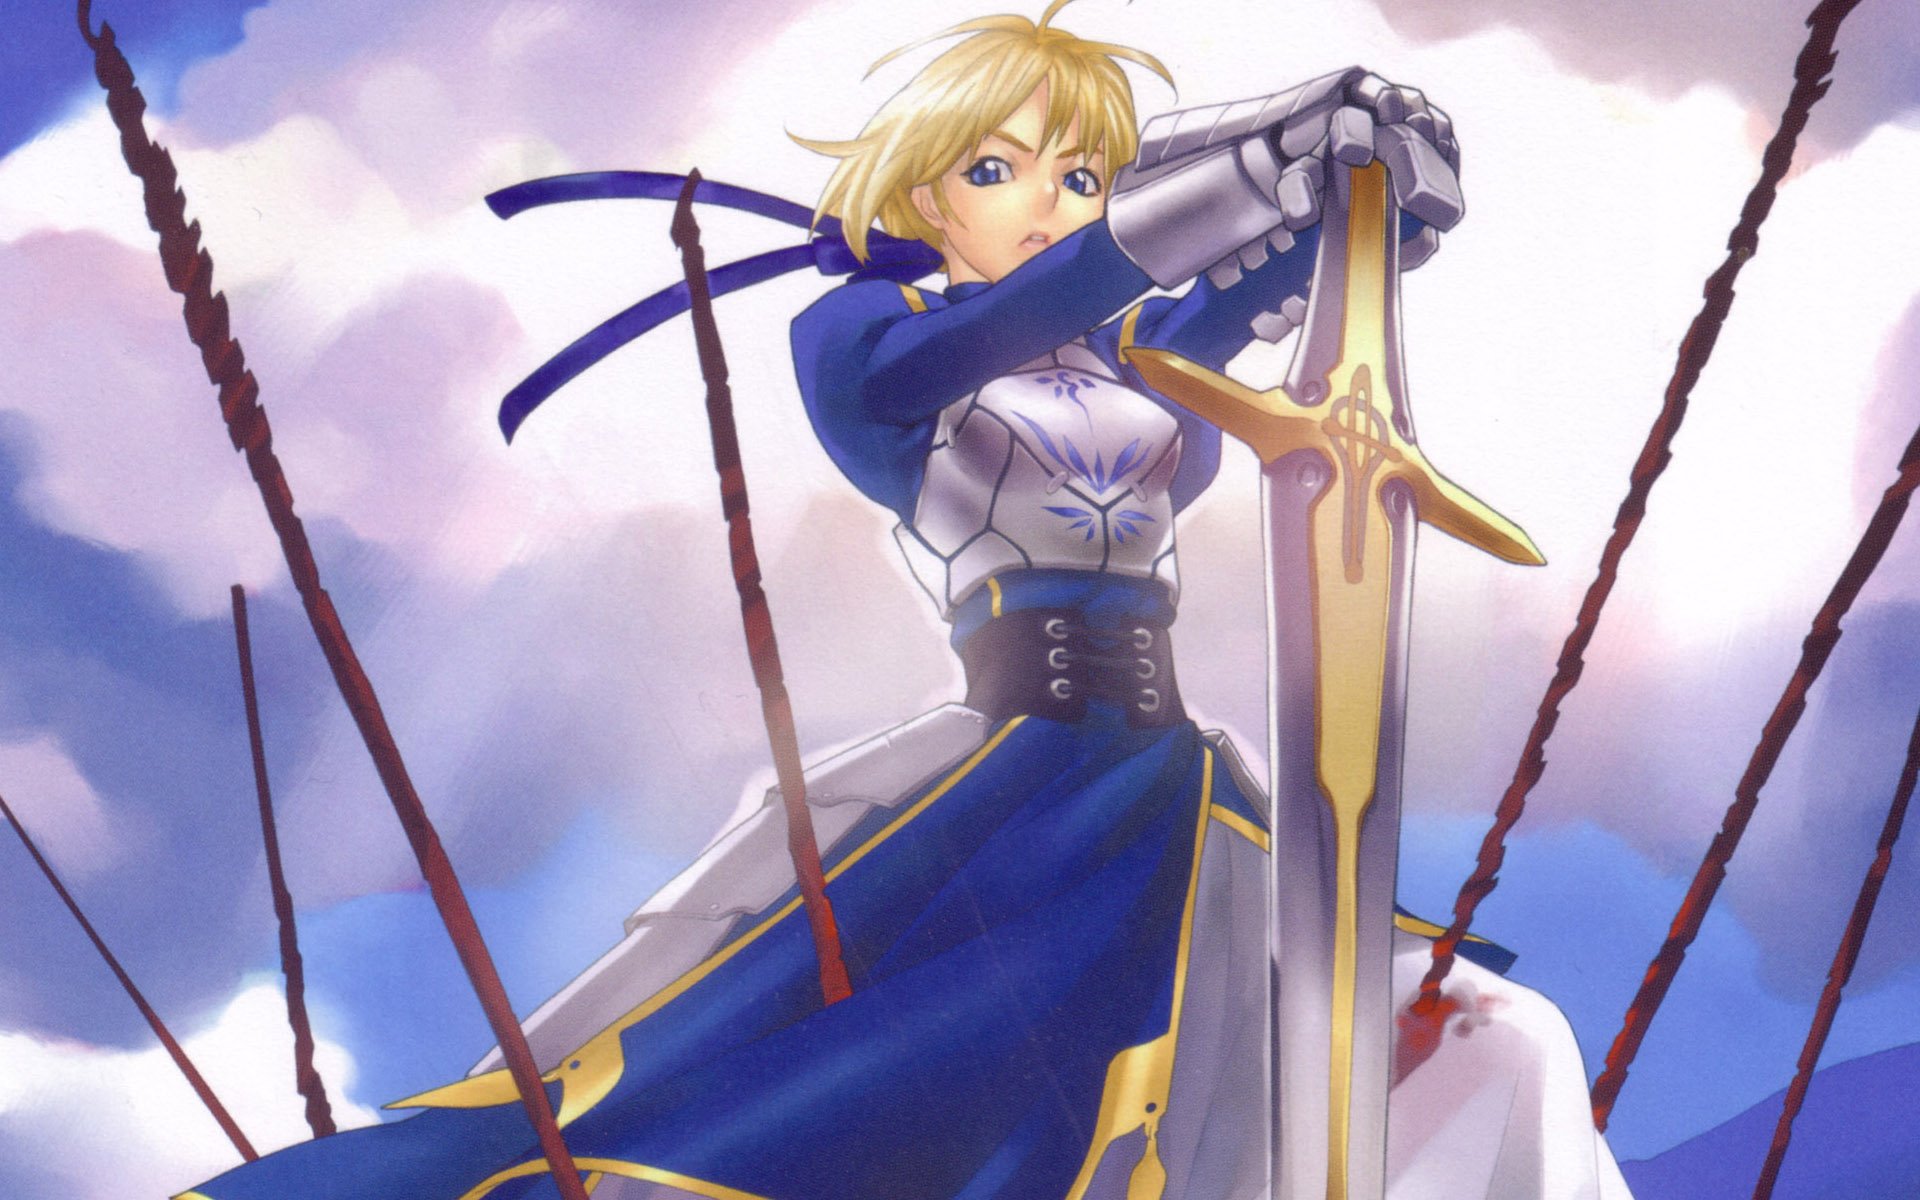 Saber   Fate Stay Night Wallpaper 24684616